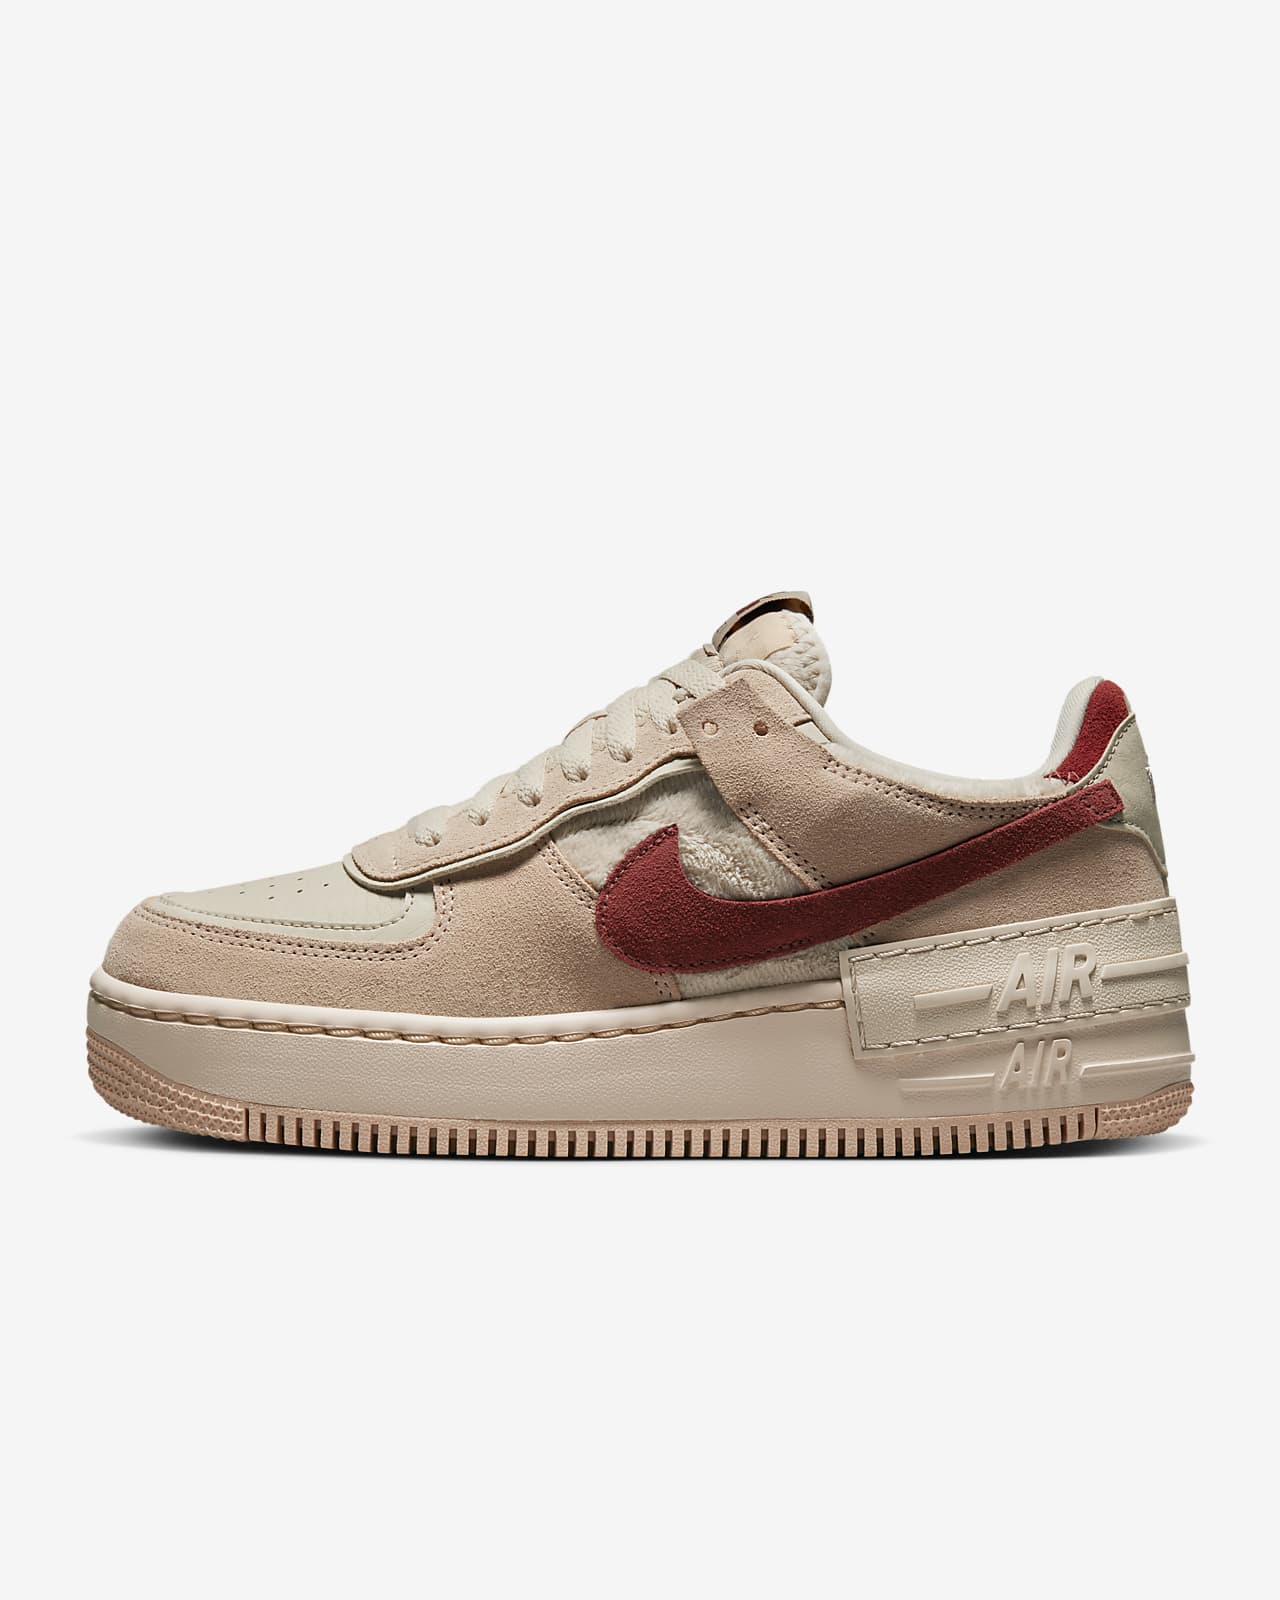 womens nike airforce 1 shoes